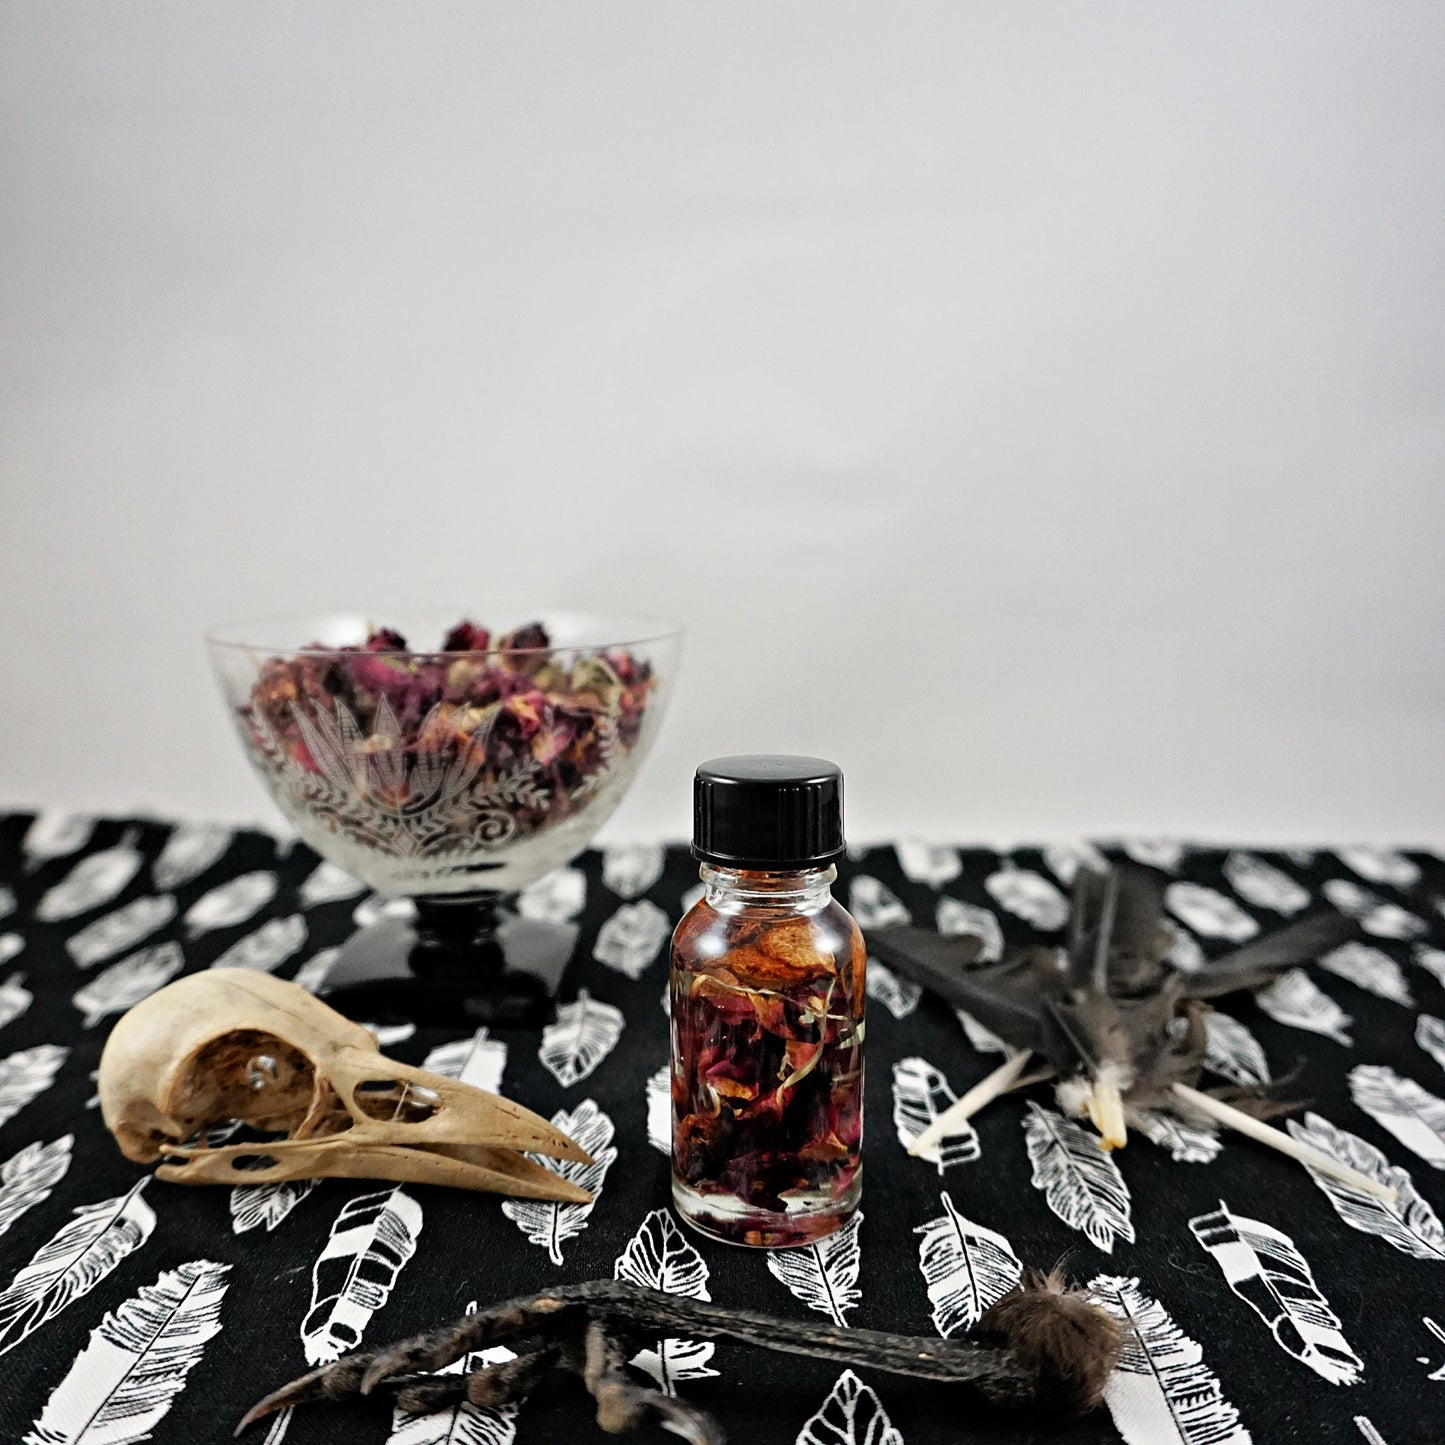 THE MORRIGAN Ritual Oil, Invocation, Spell, Dark Goddess Offering, Power, Strength, Prophecy